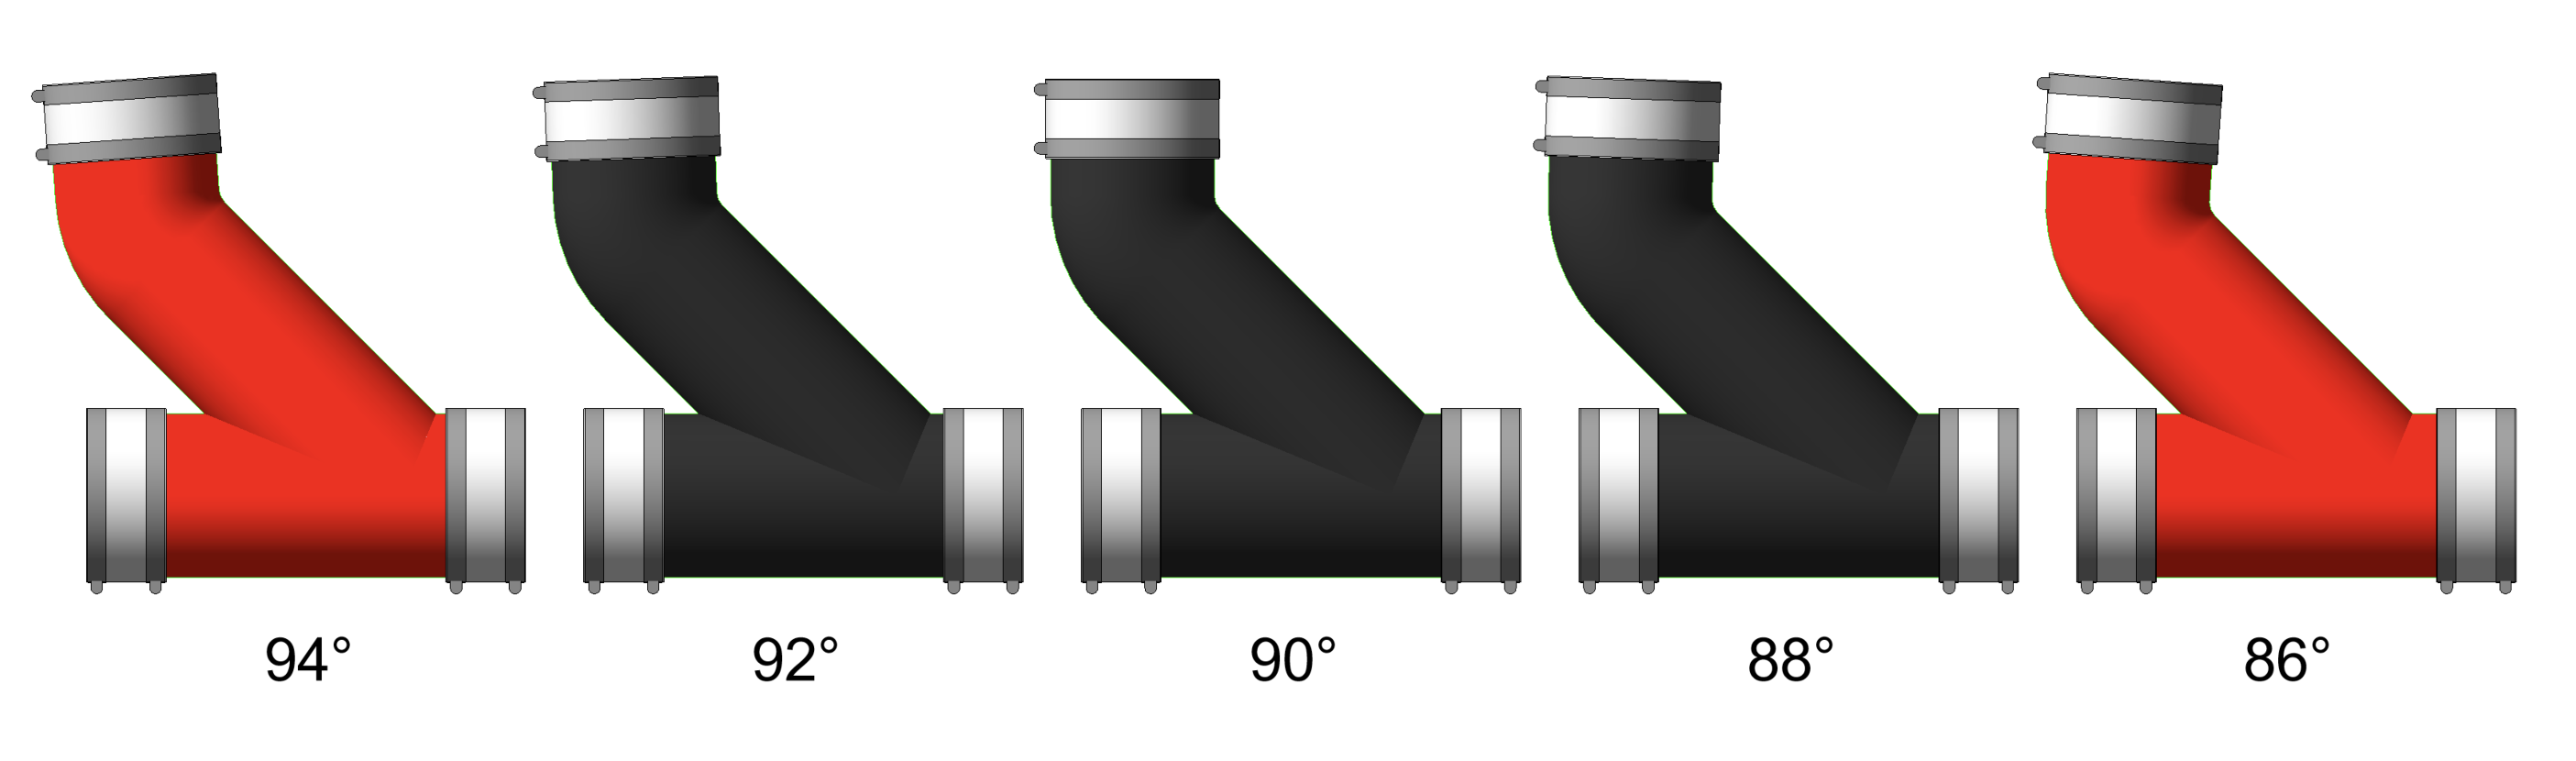 Combination fitting showing two-degree tolerance and IsCustom option. The 90 degree fitting is set as the base in black. The 92 degree fitting appears black to indicate tolerance. At 94 degrees it is marked in red to highlight intolerance.